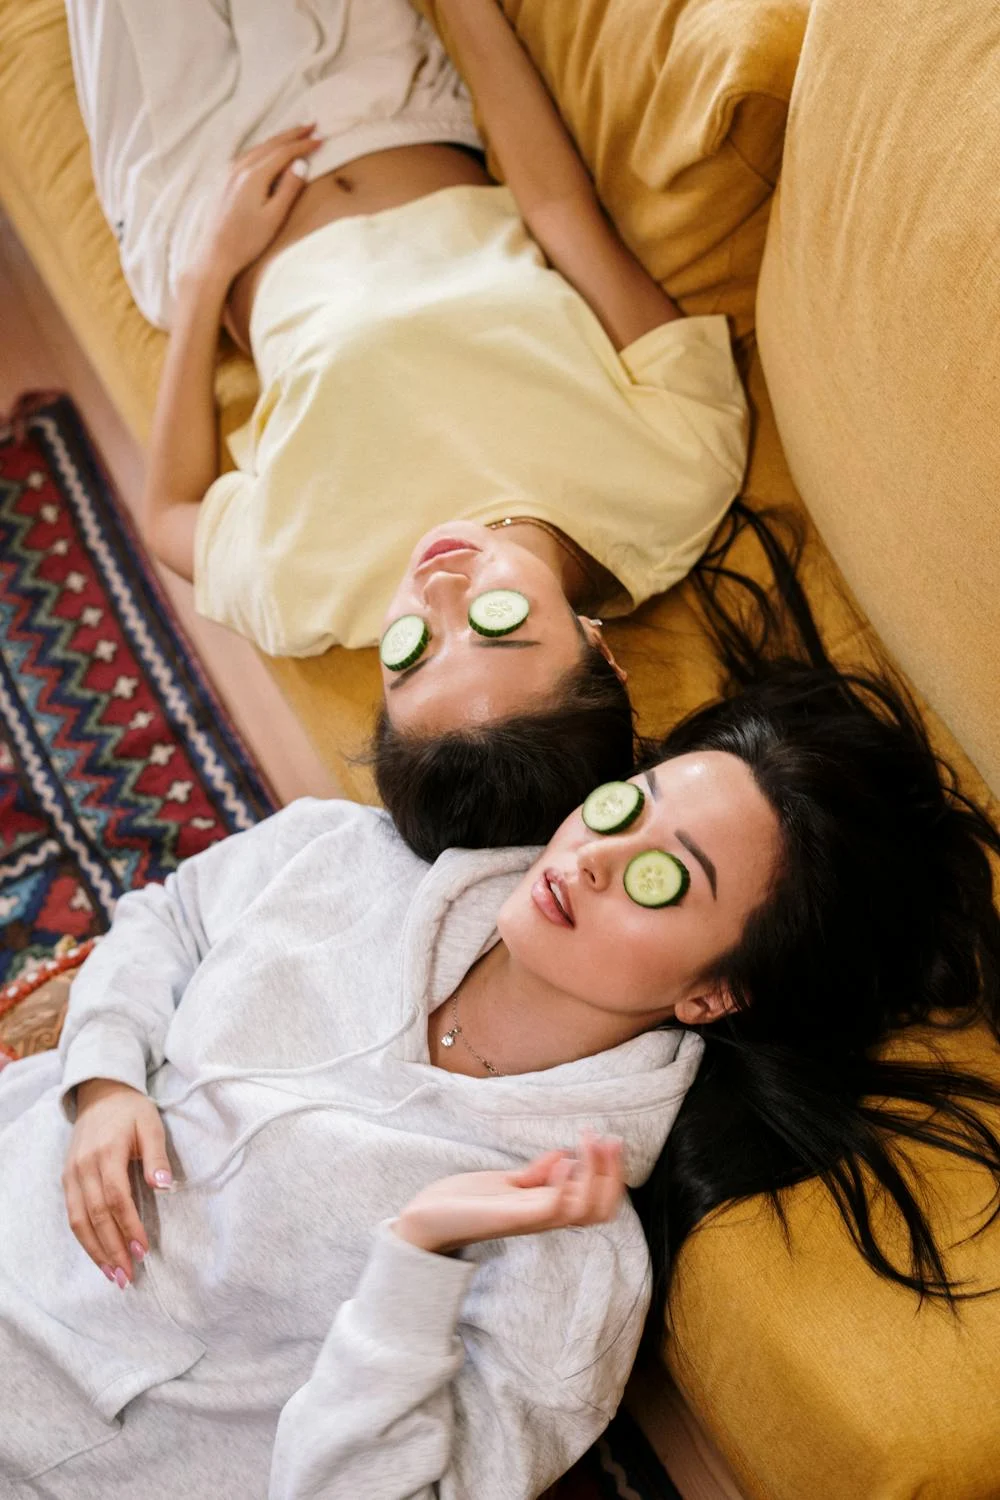 Woman in White Shirt Relaxing with Cucumber Slices Placed in Between Her Eyes